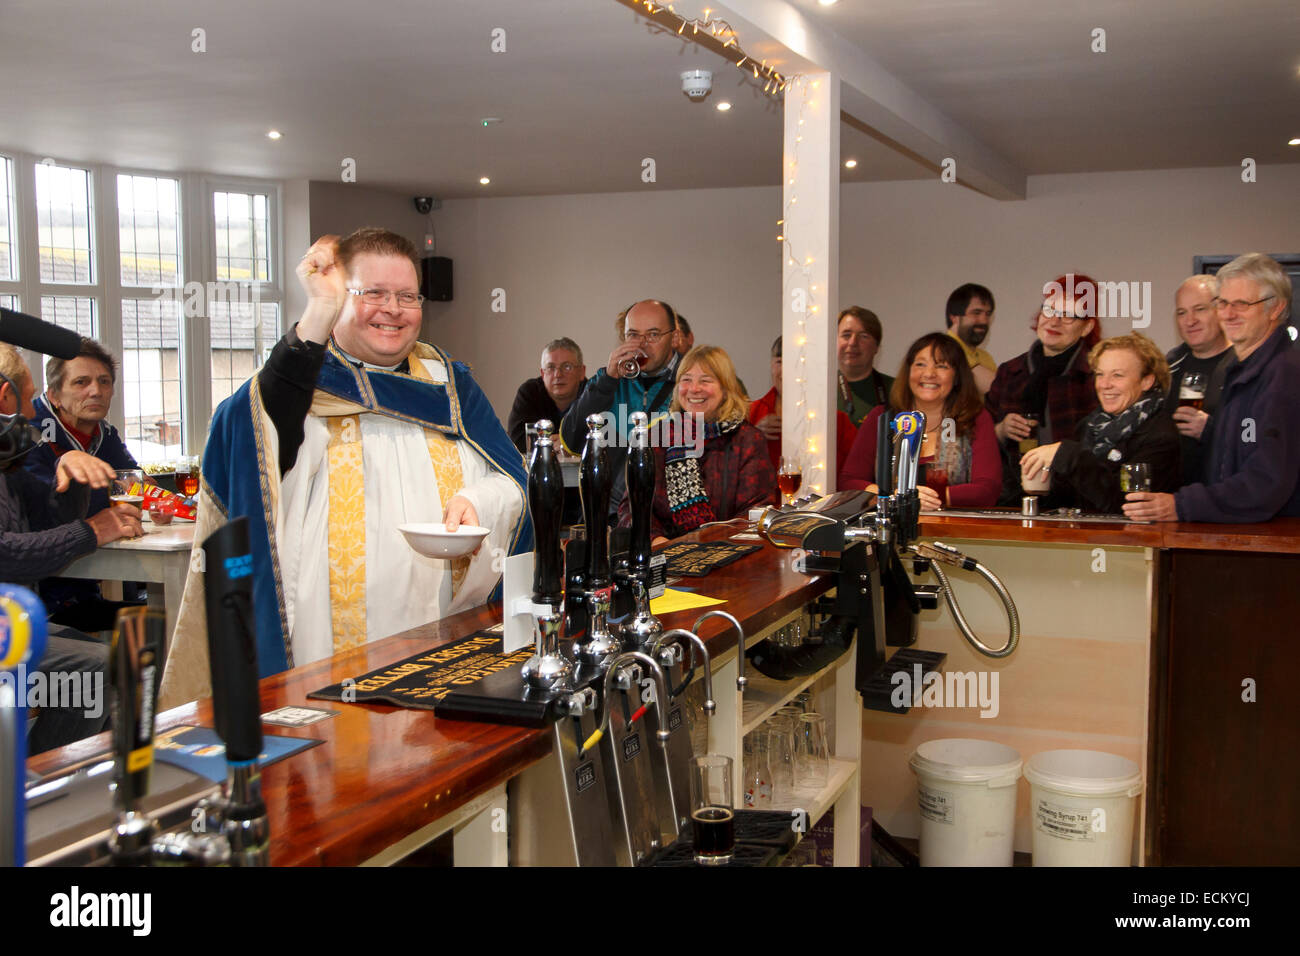 Brighton, UK - 12 December 2014: The opening of The Bevendean Cooperative Pub to the general public. In front of cameras from IT Stock Photo